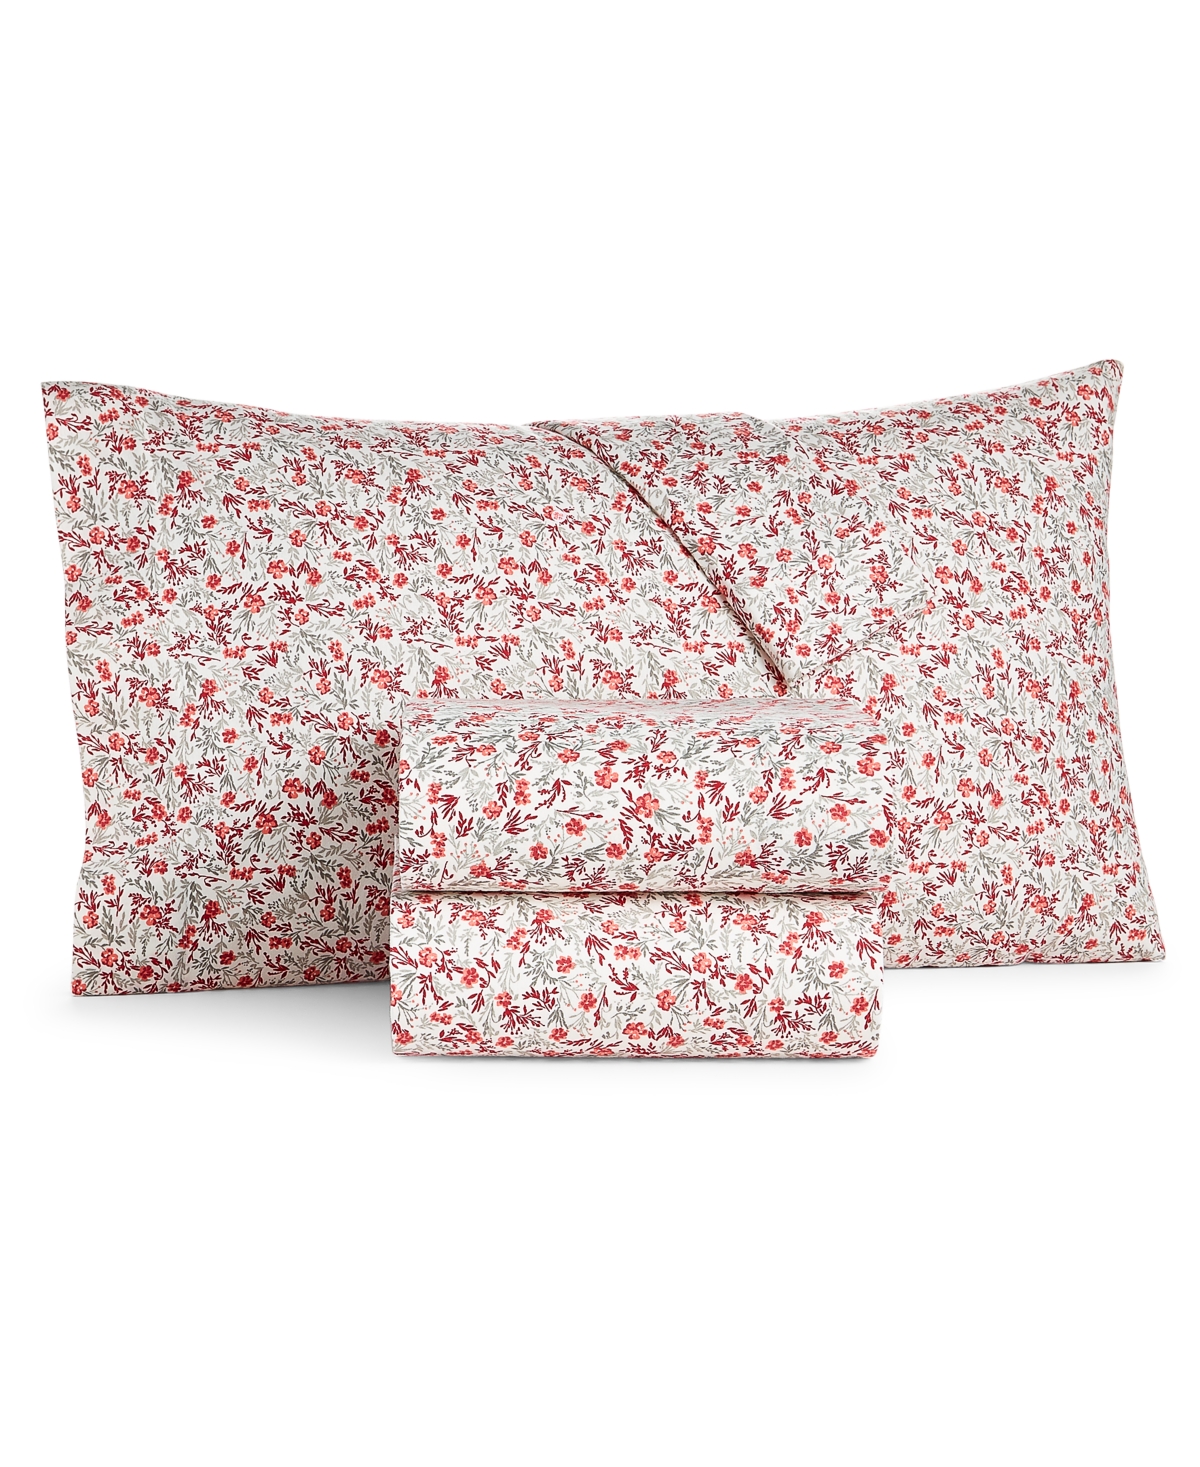 Martha Stewart Collection Holiday Printed Cotton Flannel 3-pc. Sheet Set, Twin, Created For Macy's In Ditsy Floral